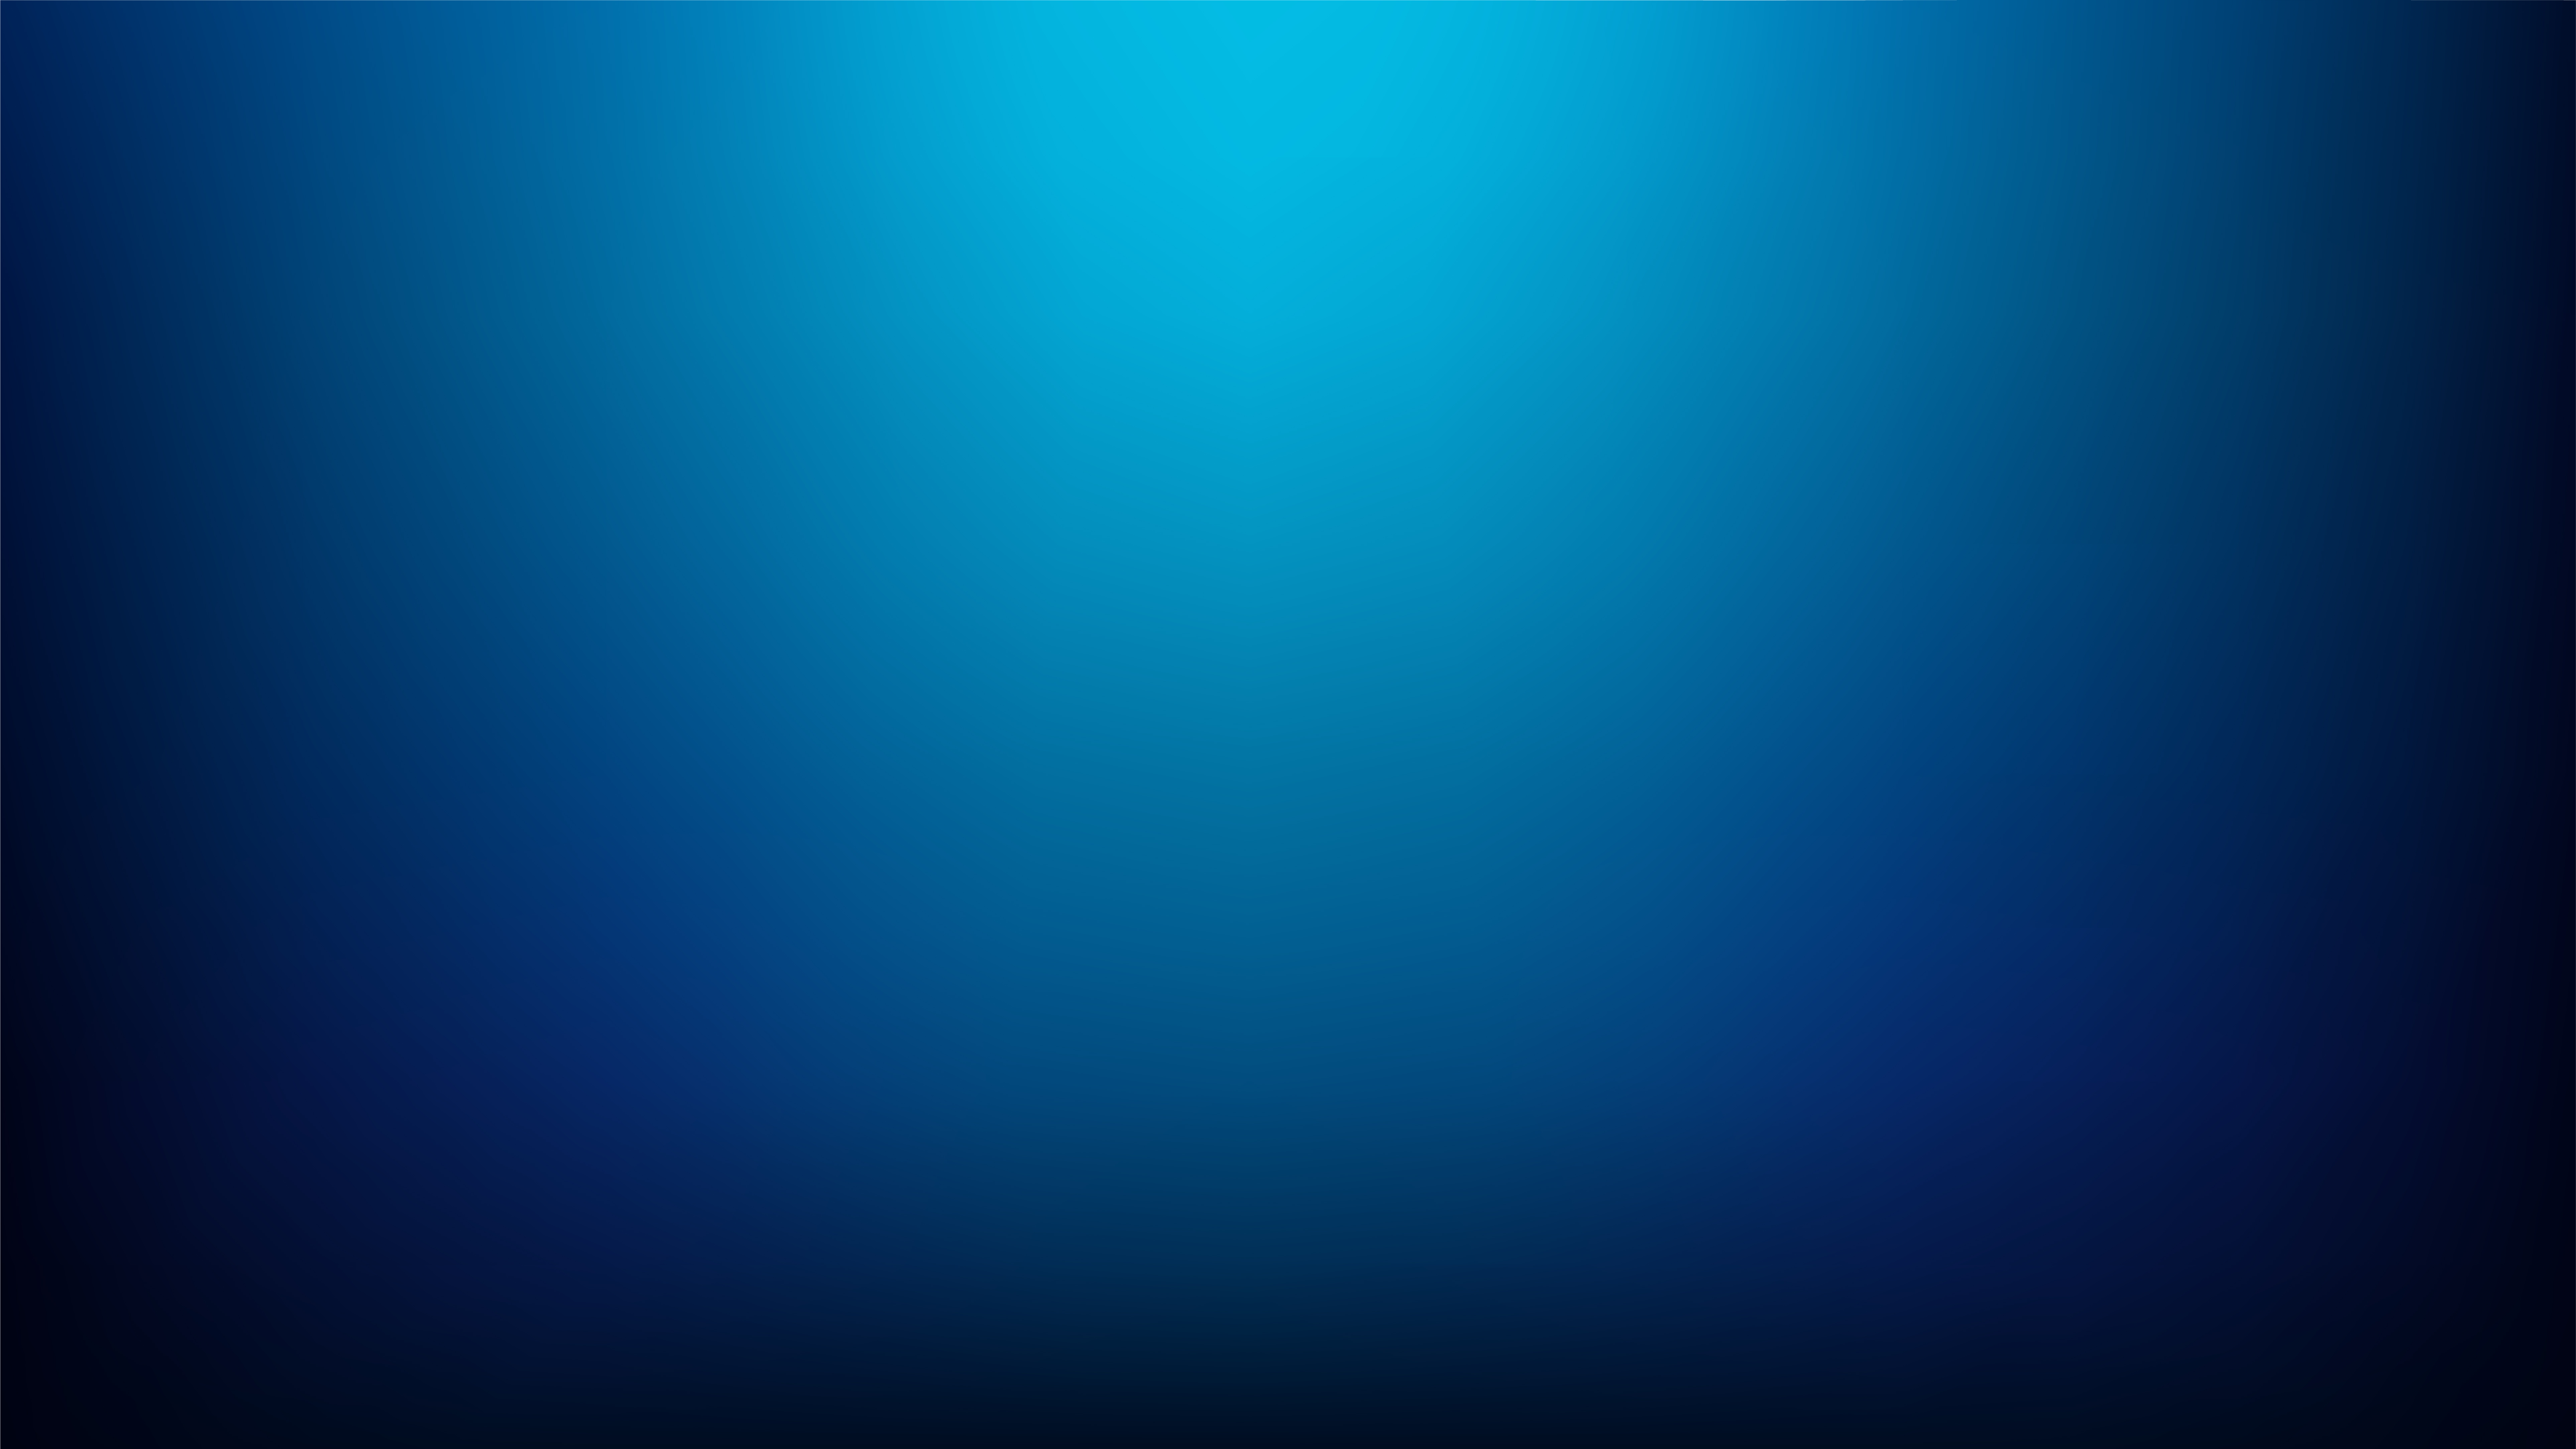 Dark Blue Wide Background With Radial Blurred Lighting 3031775 Vector